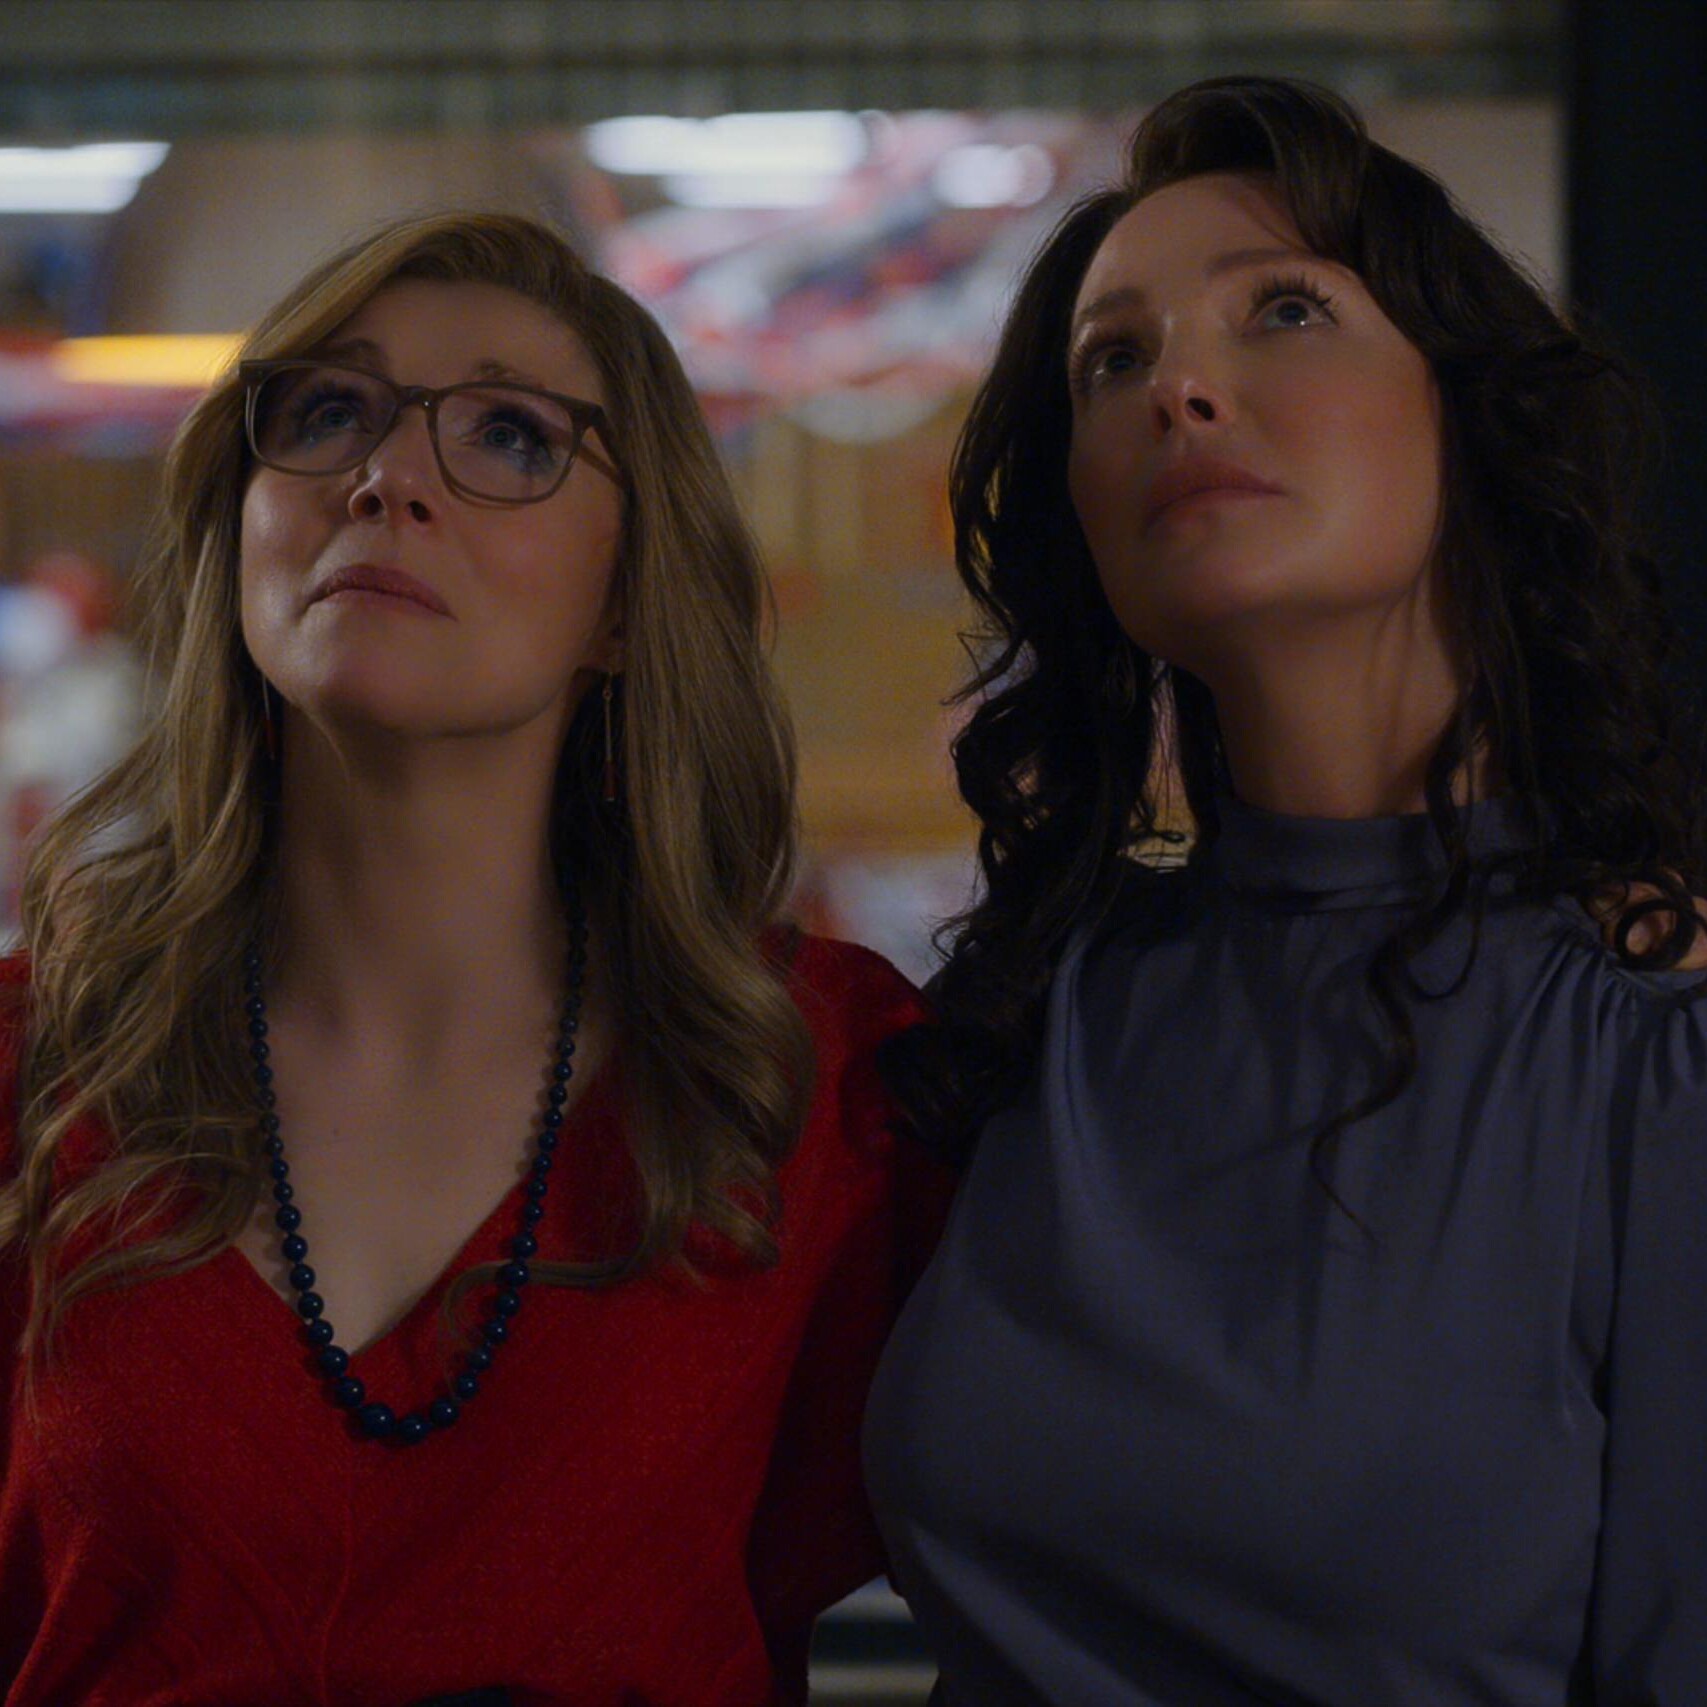 Firefly Lane. (L to R) Sarah Chalke as Kate, Katherine Heigl as Tully in episode 206 of Firefly Lane. Cr. Courtesy of Netflix © 2022